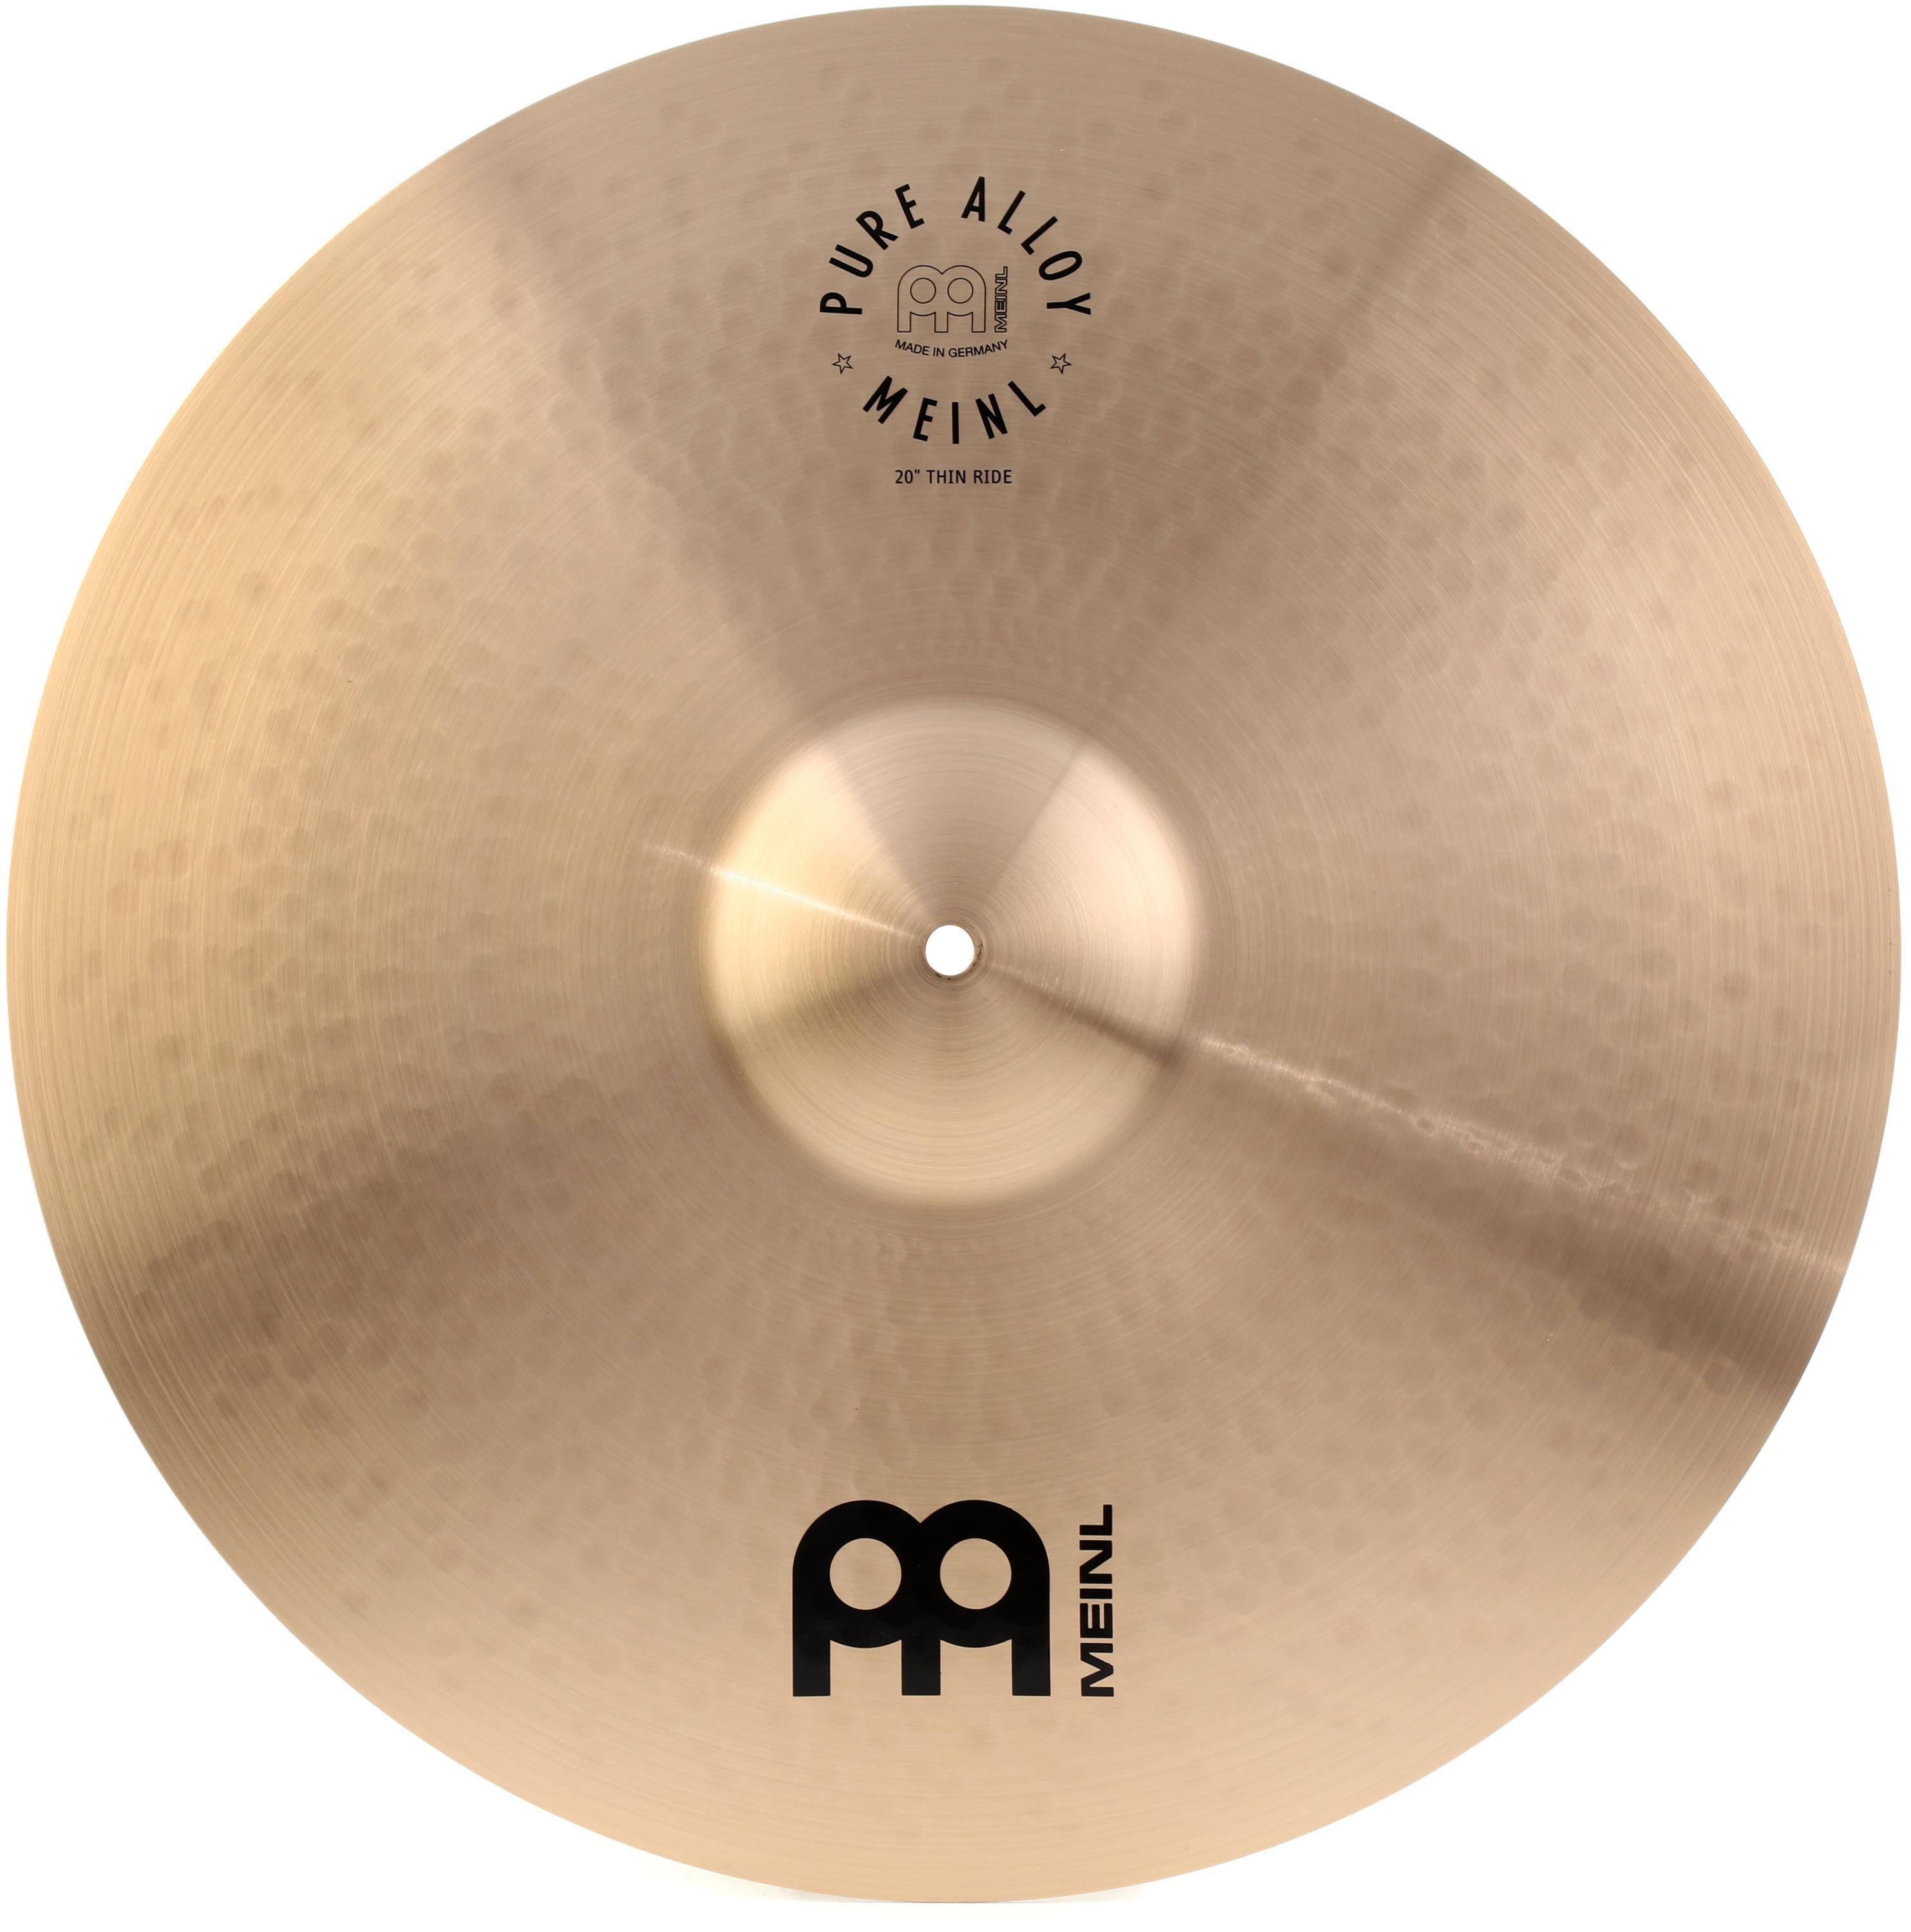 Bundled Item: Meinl Cymbals Pure Alloy Ride Cymbal - 20 inch, Thin